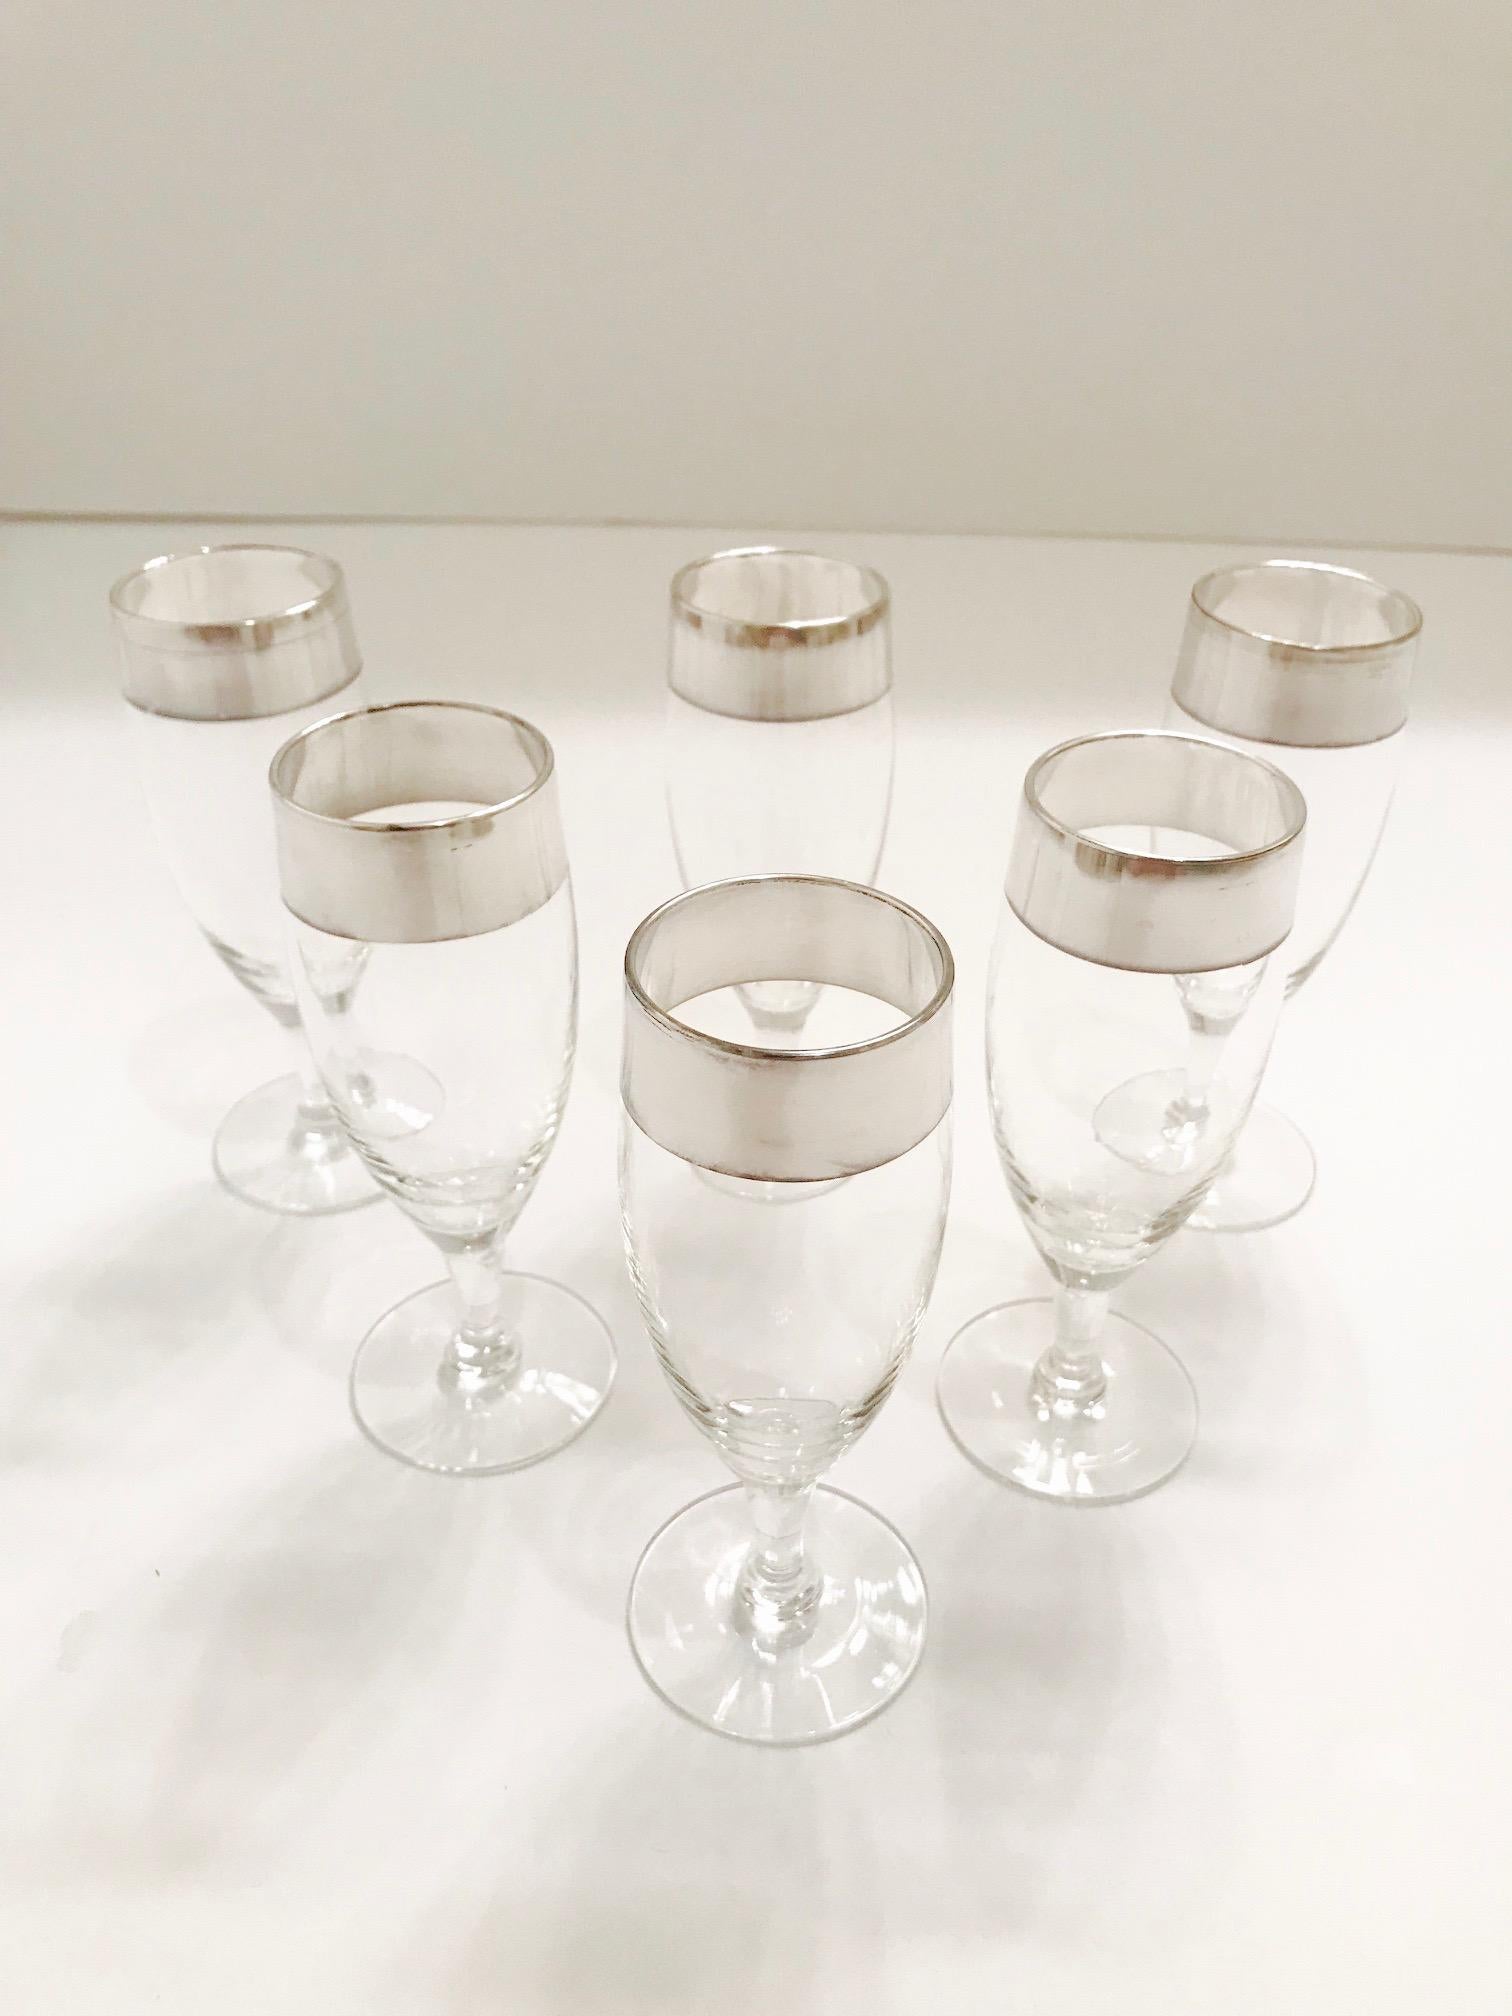 American Set of Six Champagne Flutes with Sterling Silver Overlay by Dorothy Thorpe, 1950